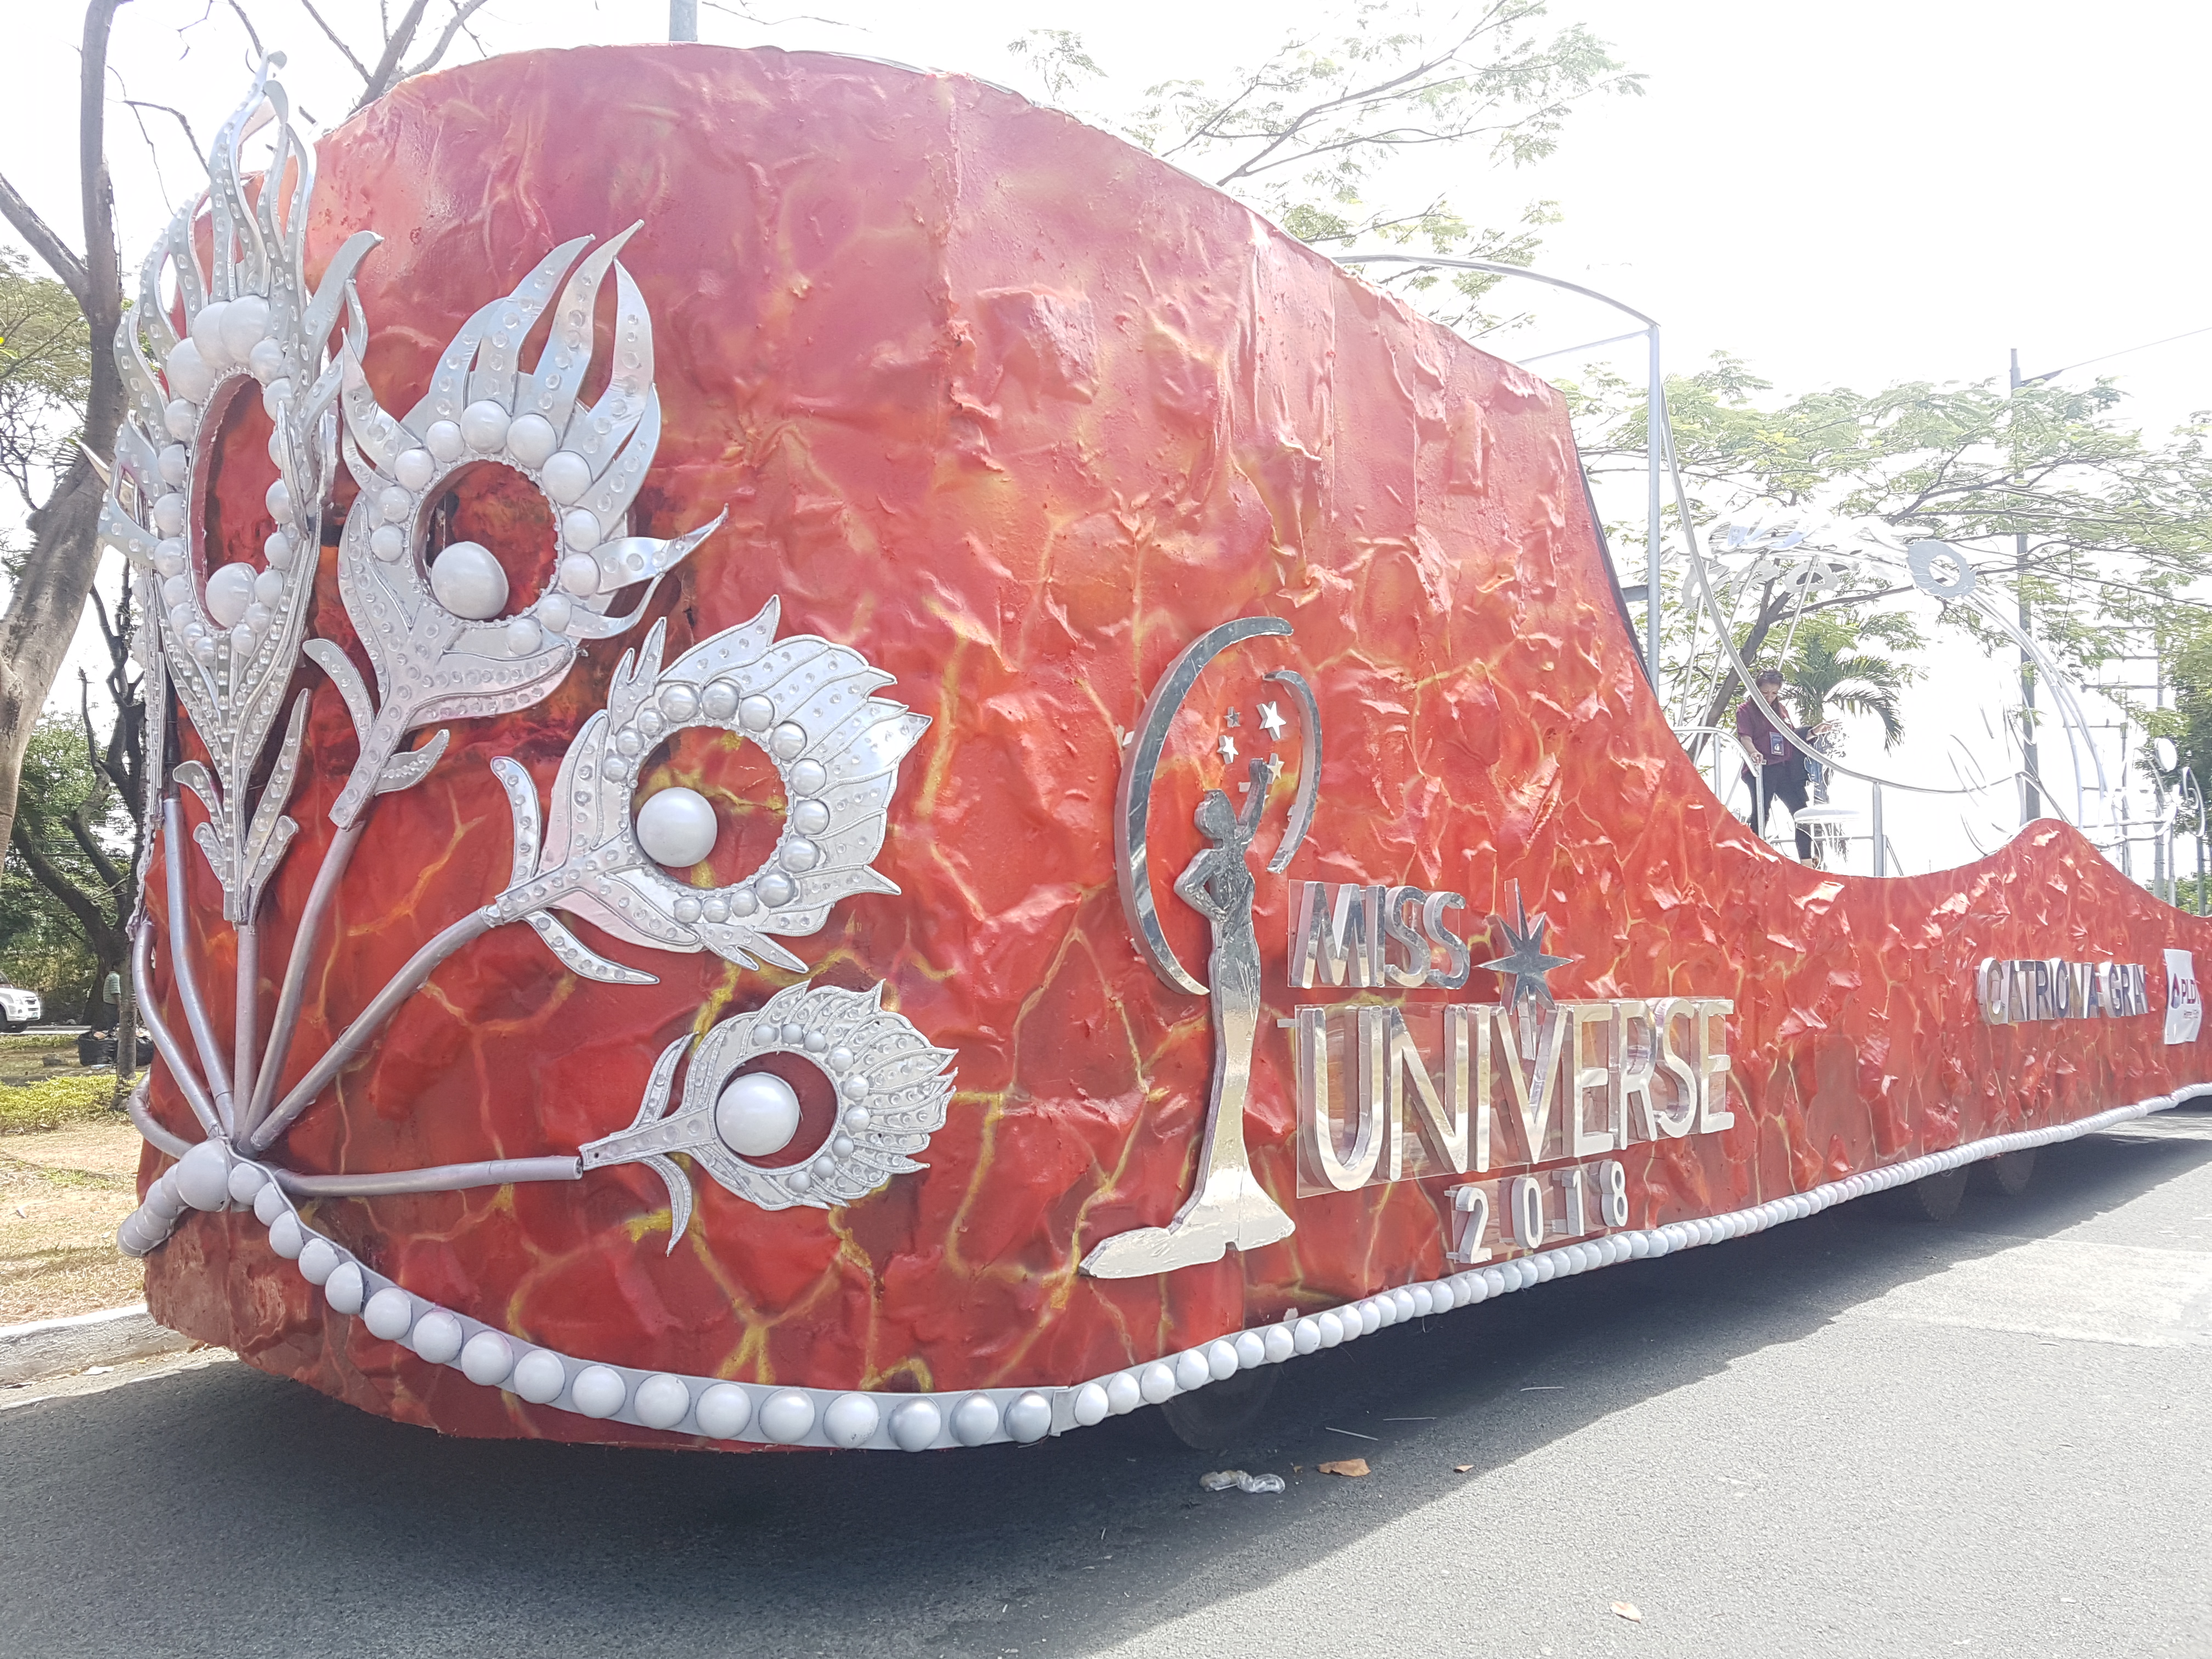 LOOK: Miss Universe 2018 Catriona Gray's lava-inspired parade float